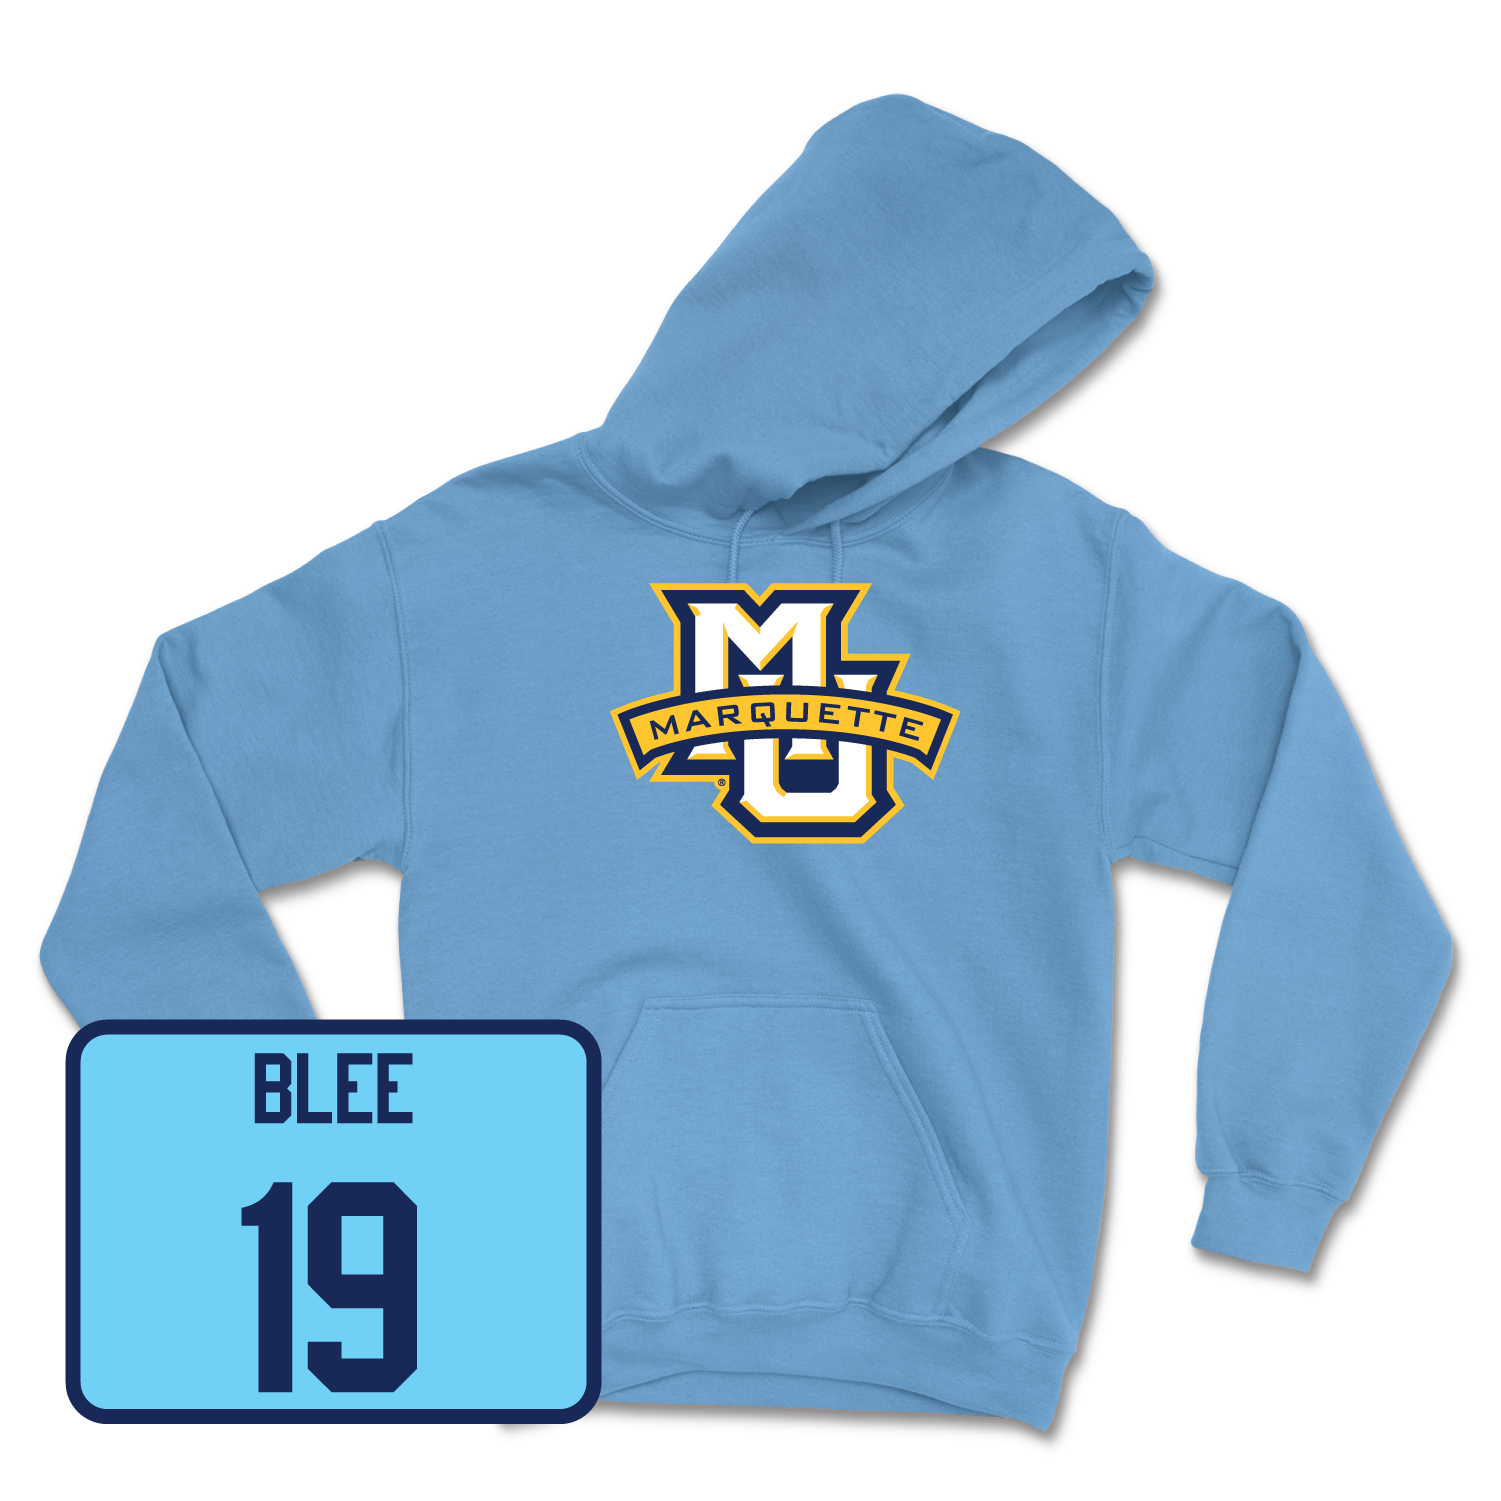 Championship Blue Women's Lacrosse Marquette Hoodie 2 Small / Mary Blee | #19